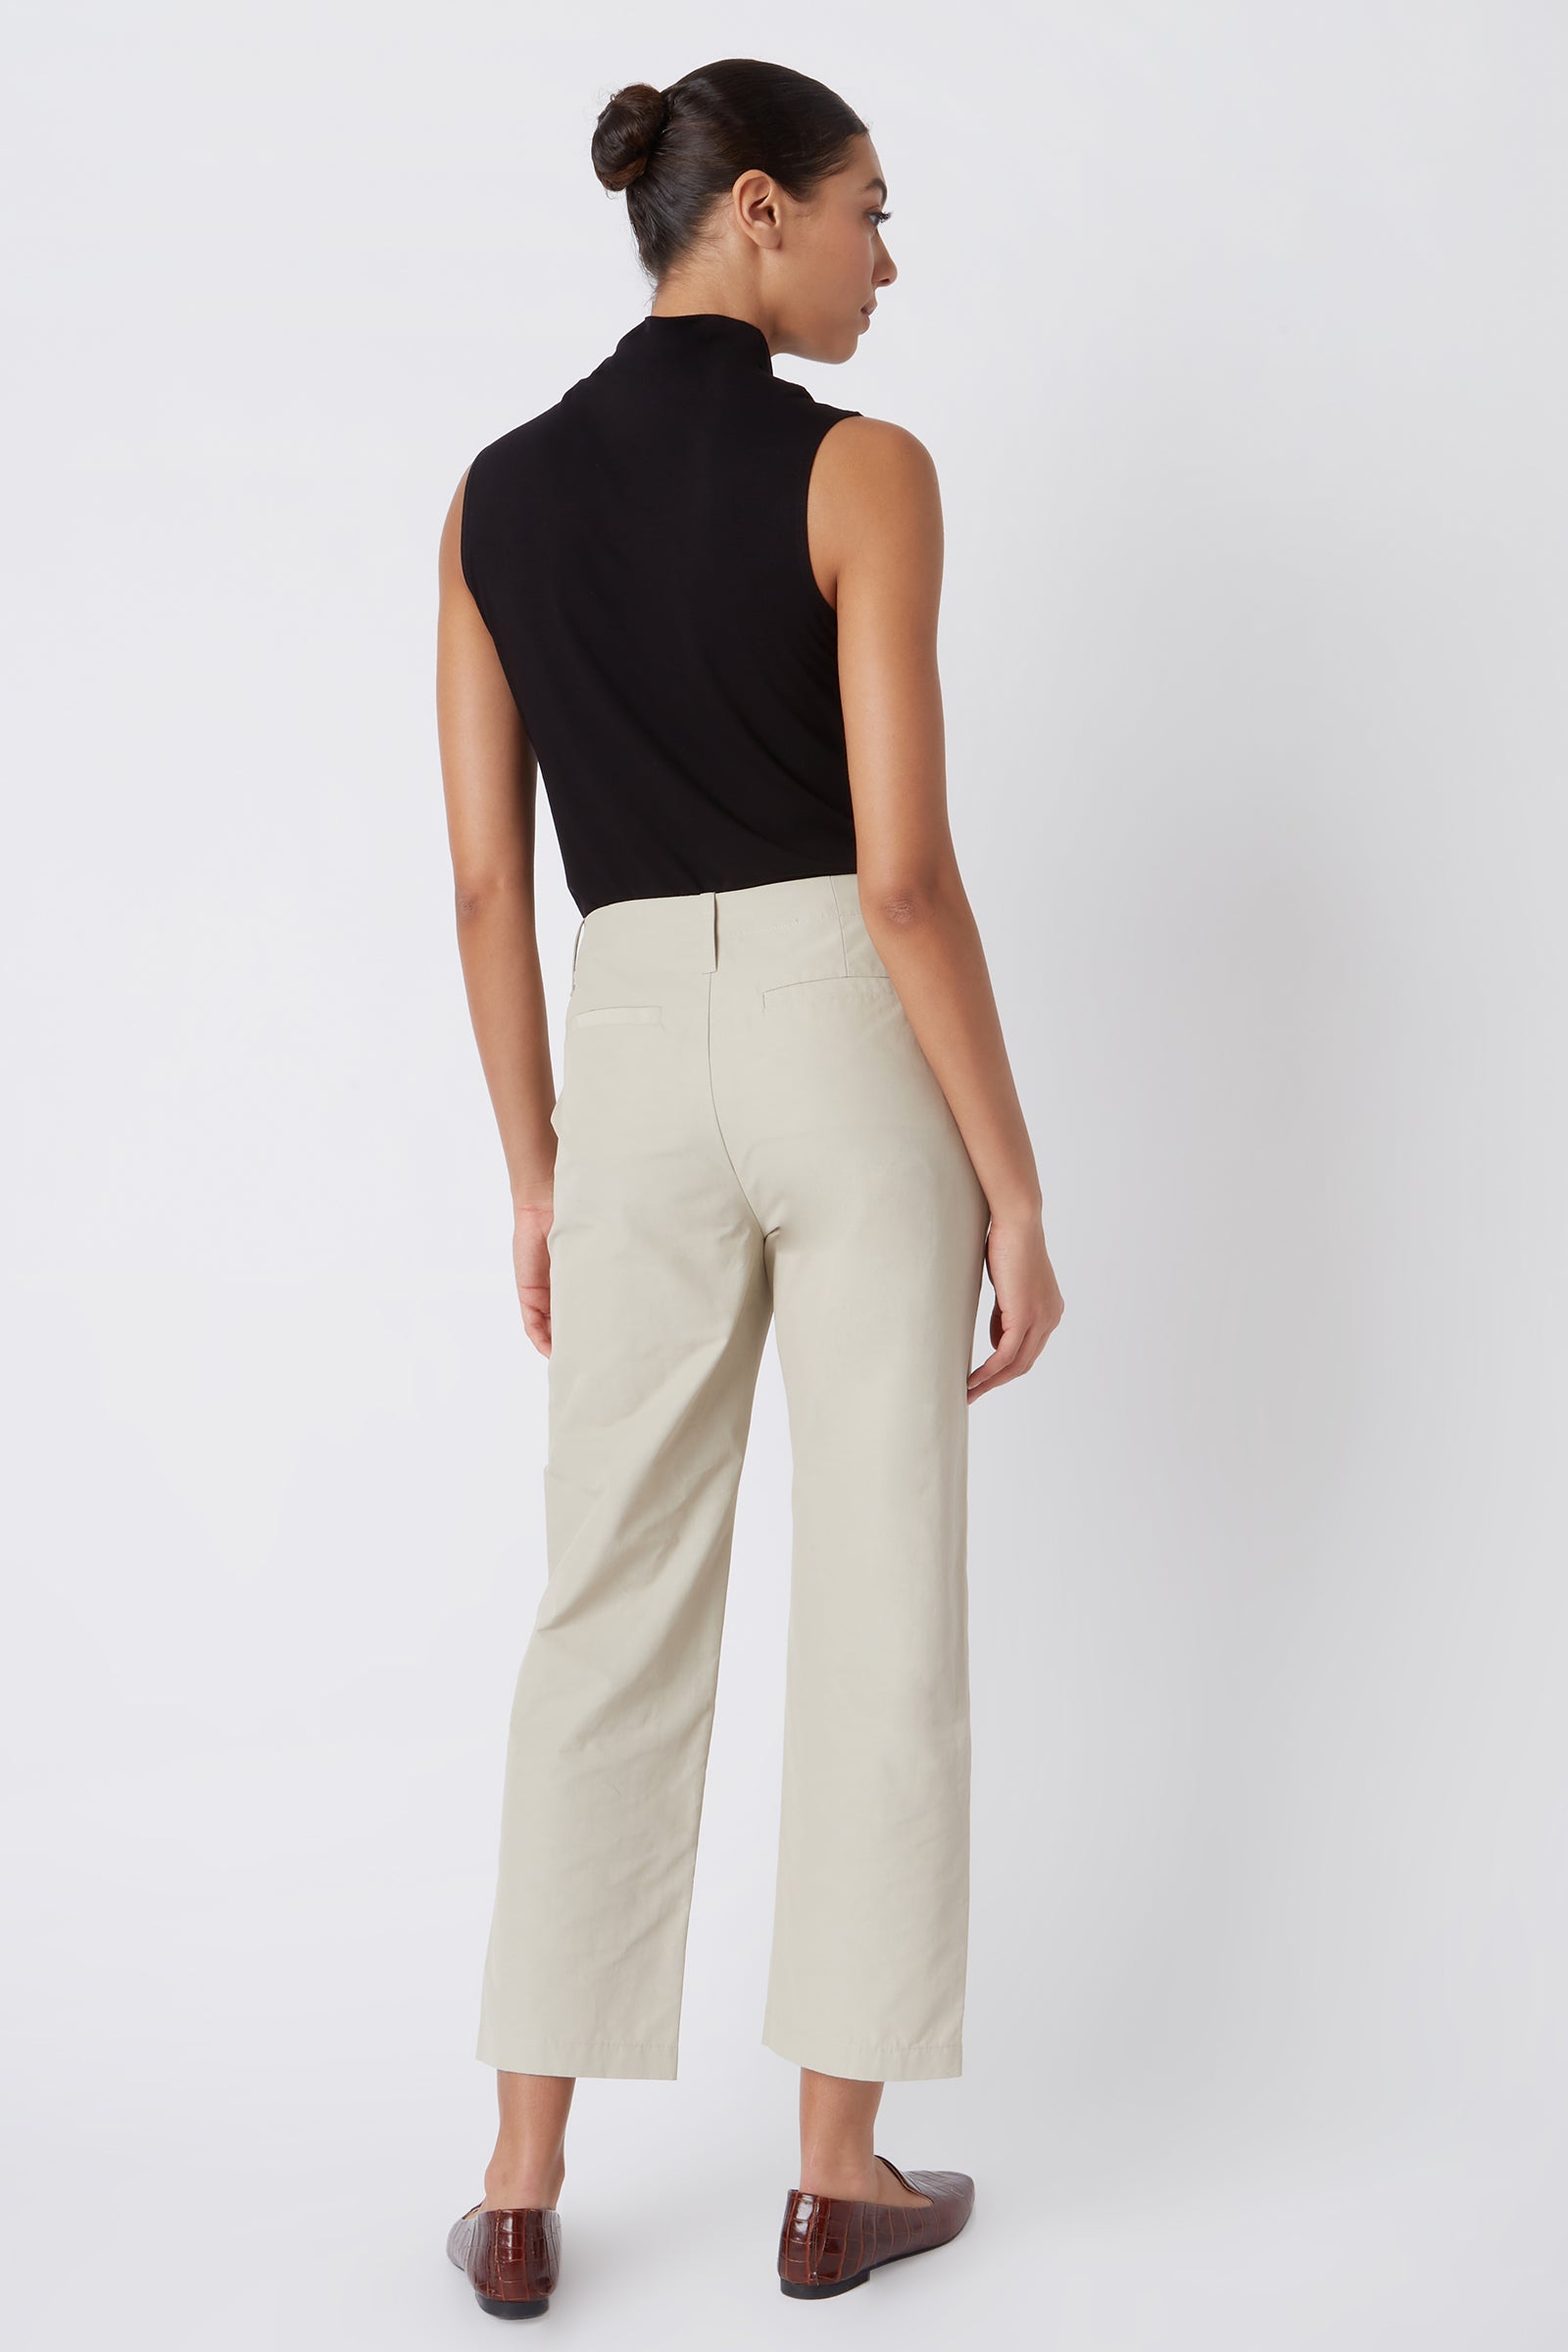 Kal Rieman Francoise Cigarette Pant in Classic Khaki Italian Broadcloth on Model with Arm Behind Back Full Front View